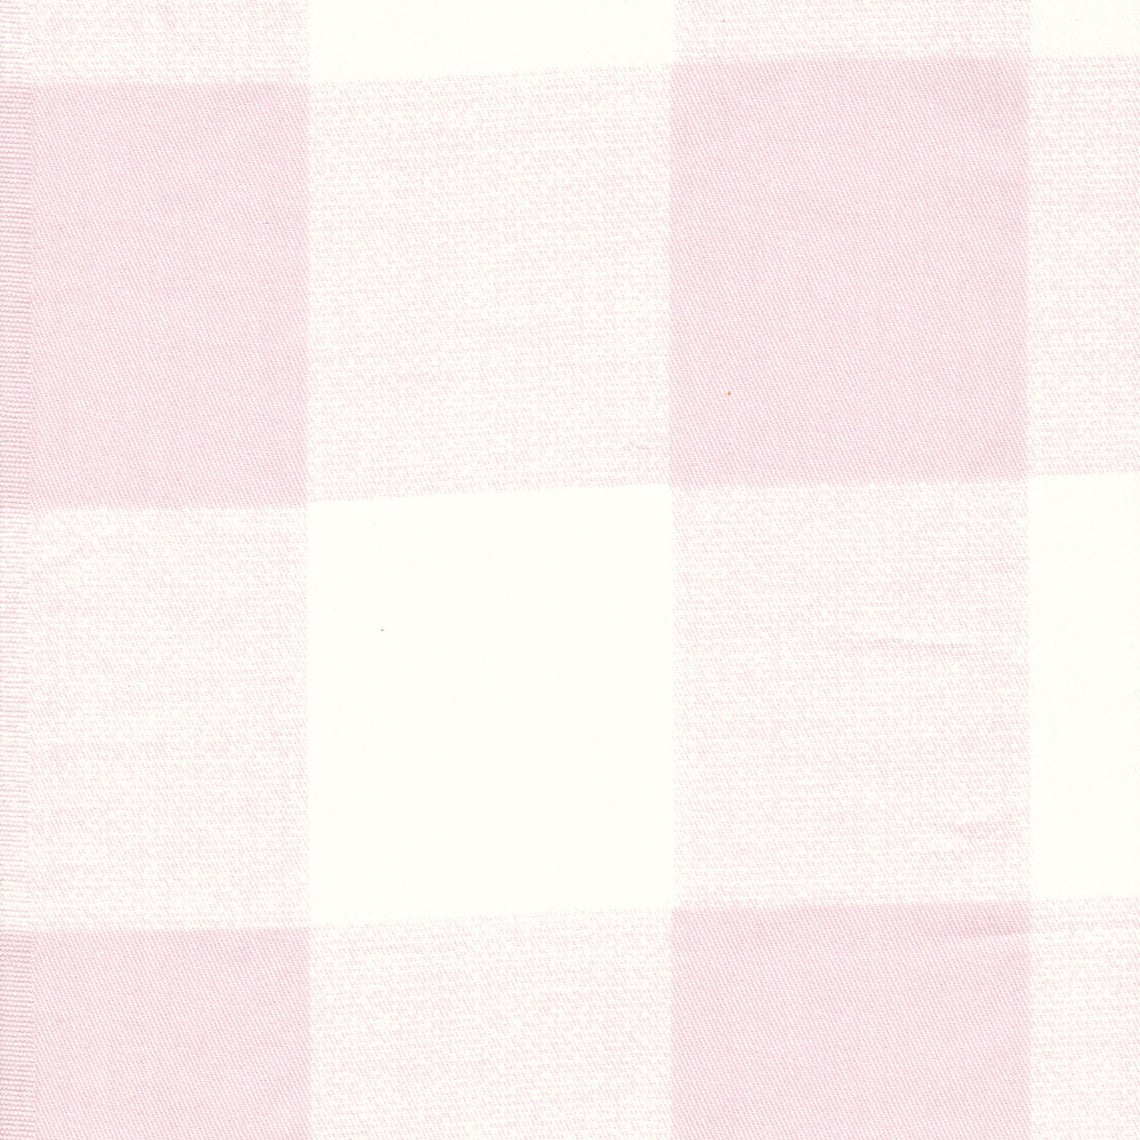 tailored bedskirt in anderson bella pale pink buffalo check plaid